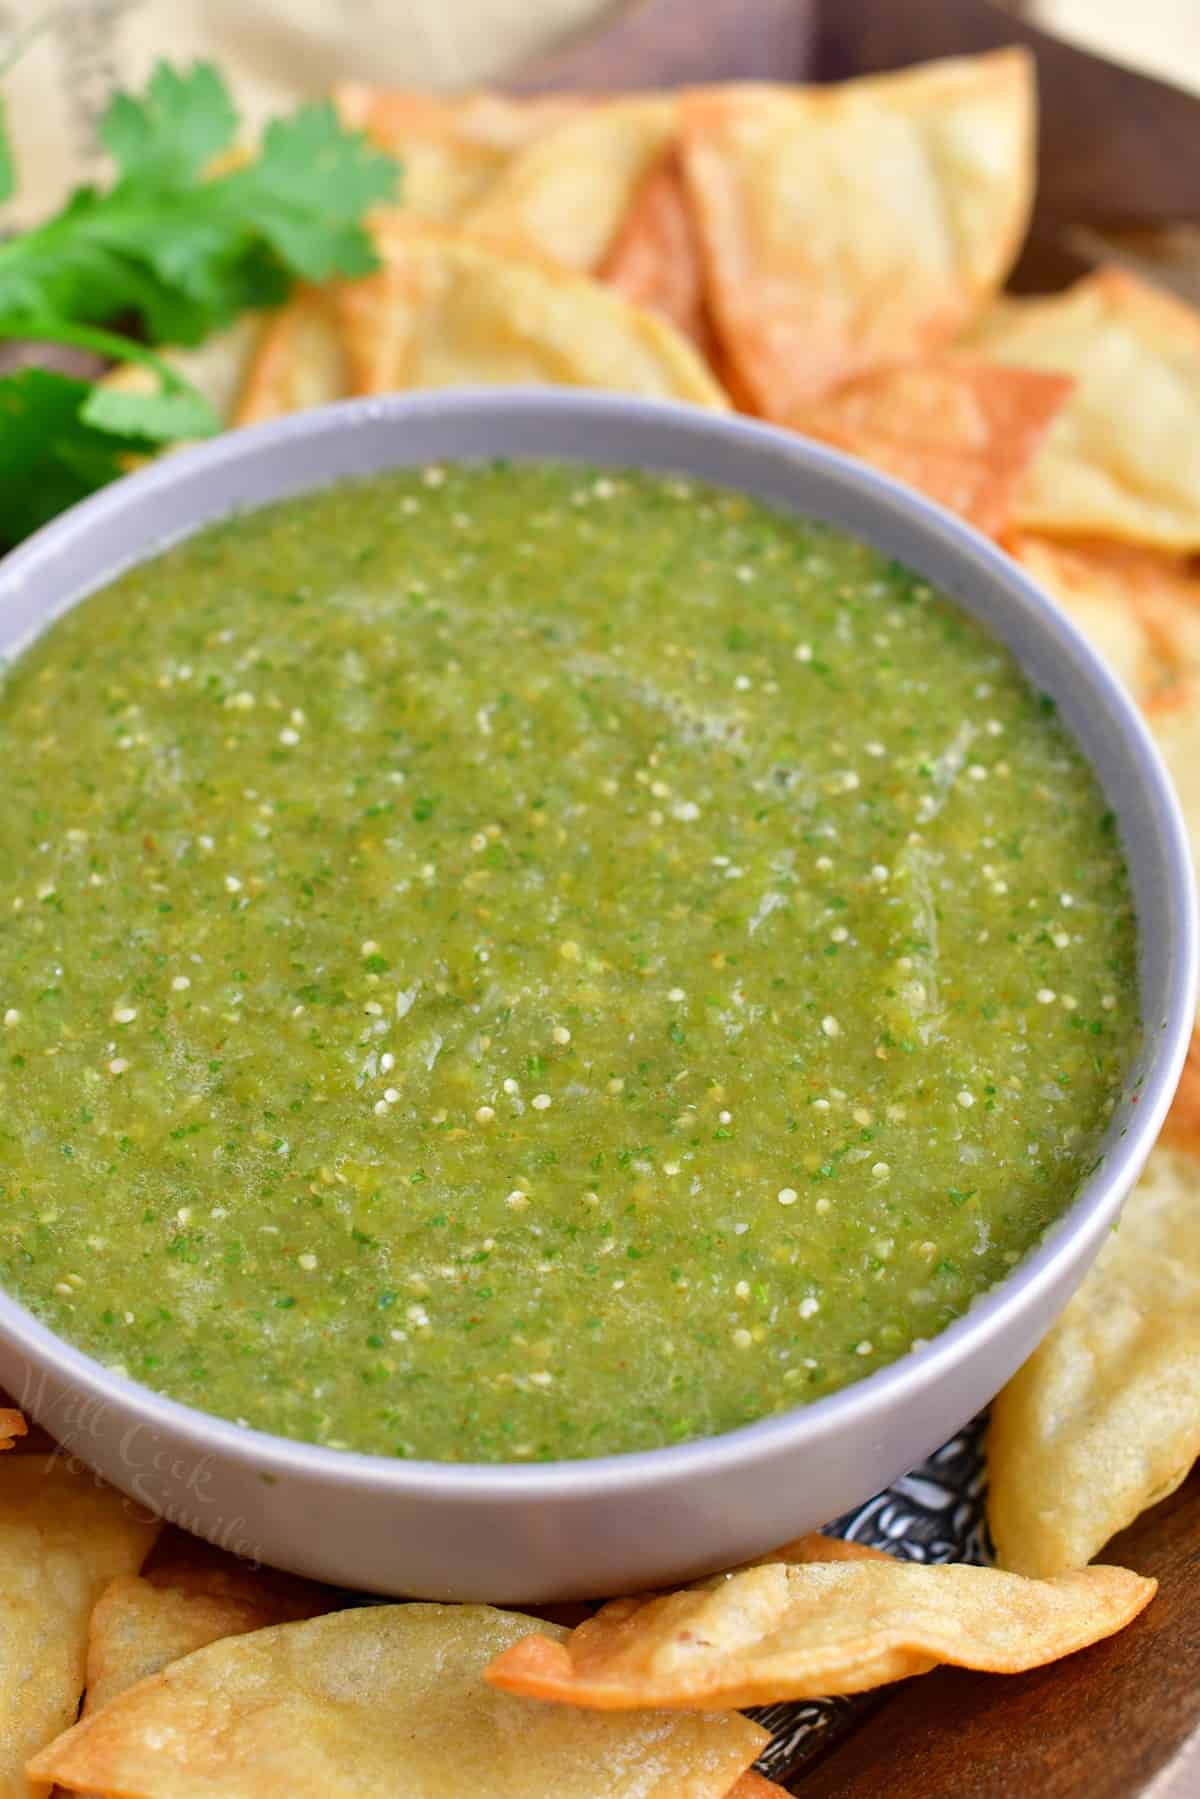 A large white bowl contains a heaping portion of salsa verde.